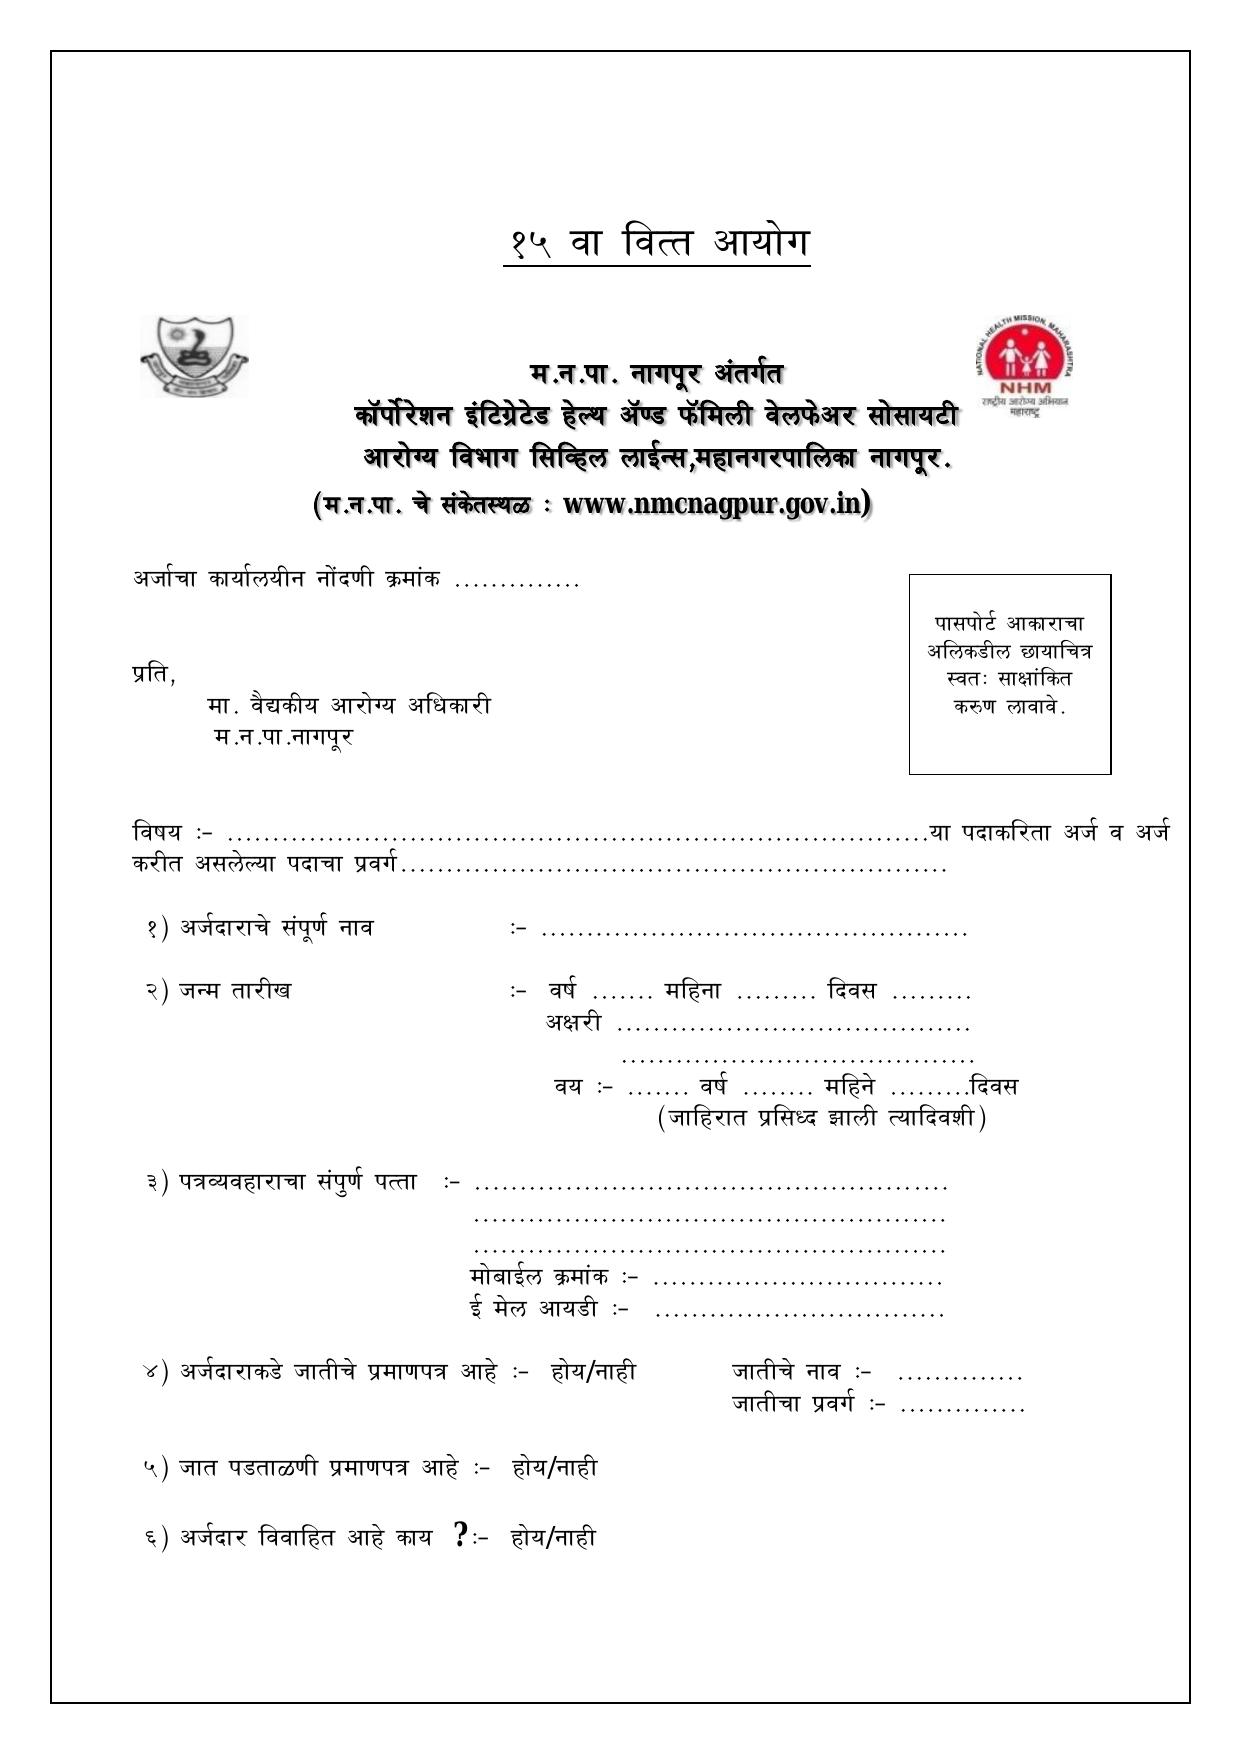 Nagpur Municipal Corporation (NMC) Full Time Medical Officer Recruitment 2023 - Page 5